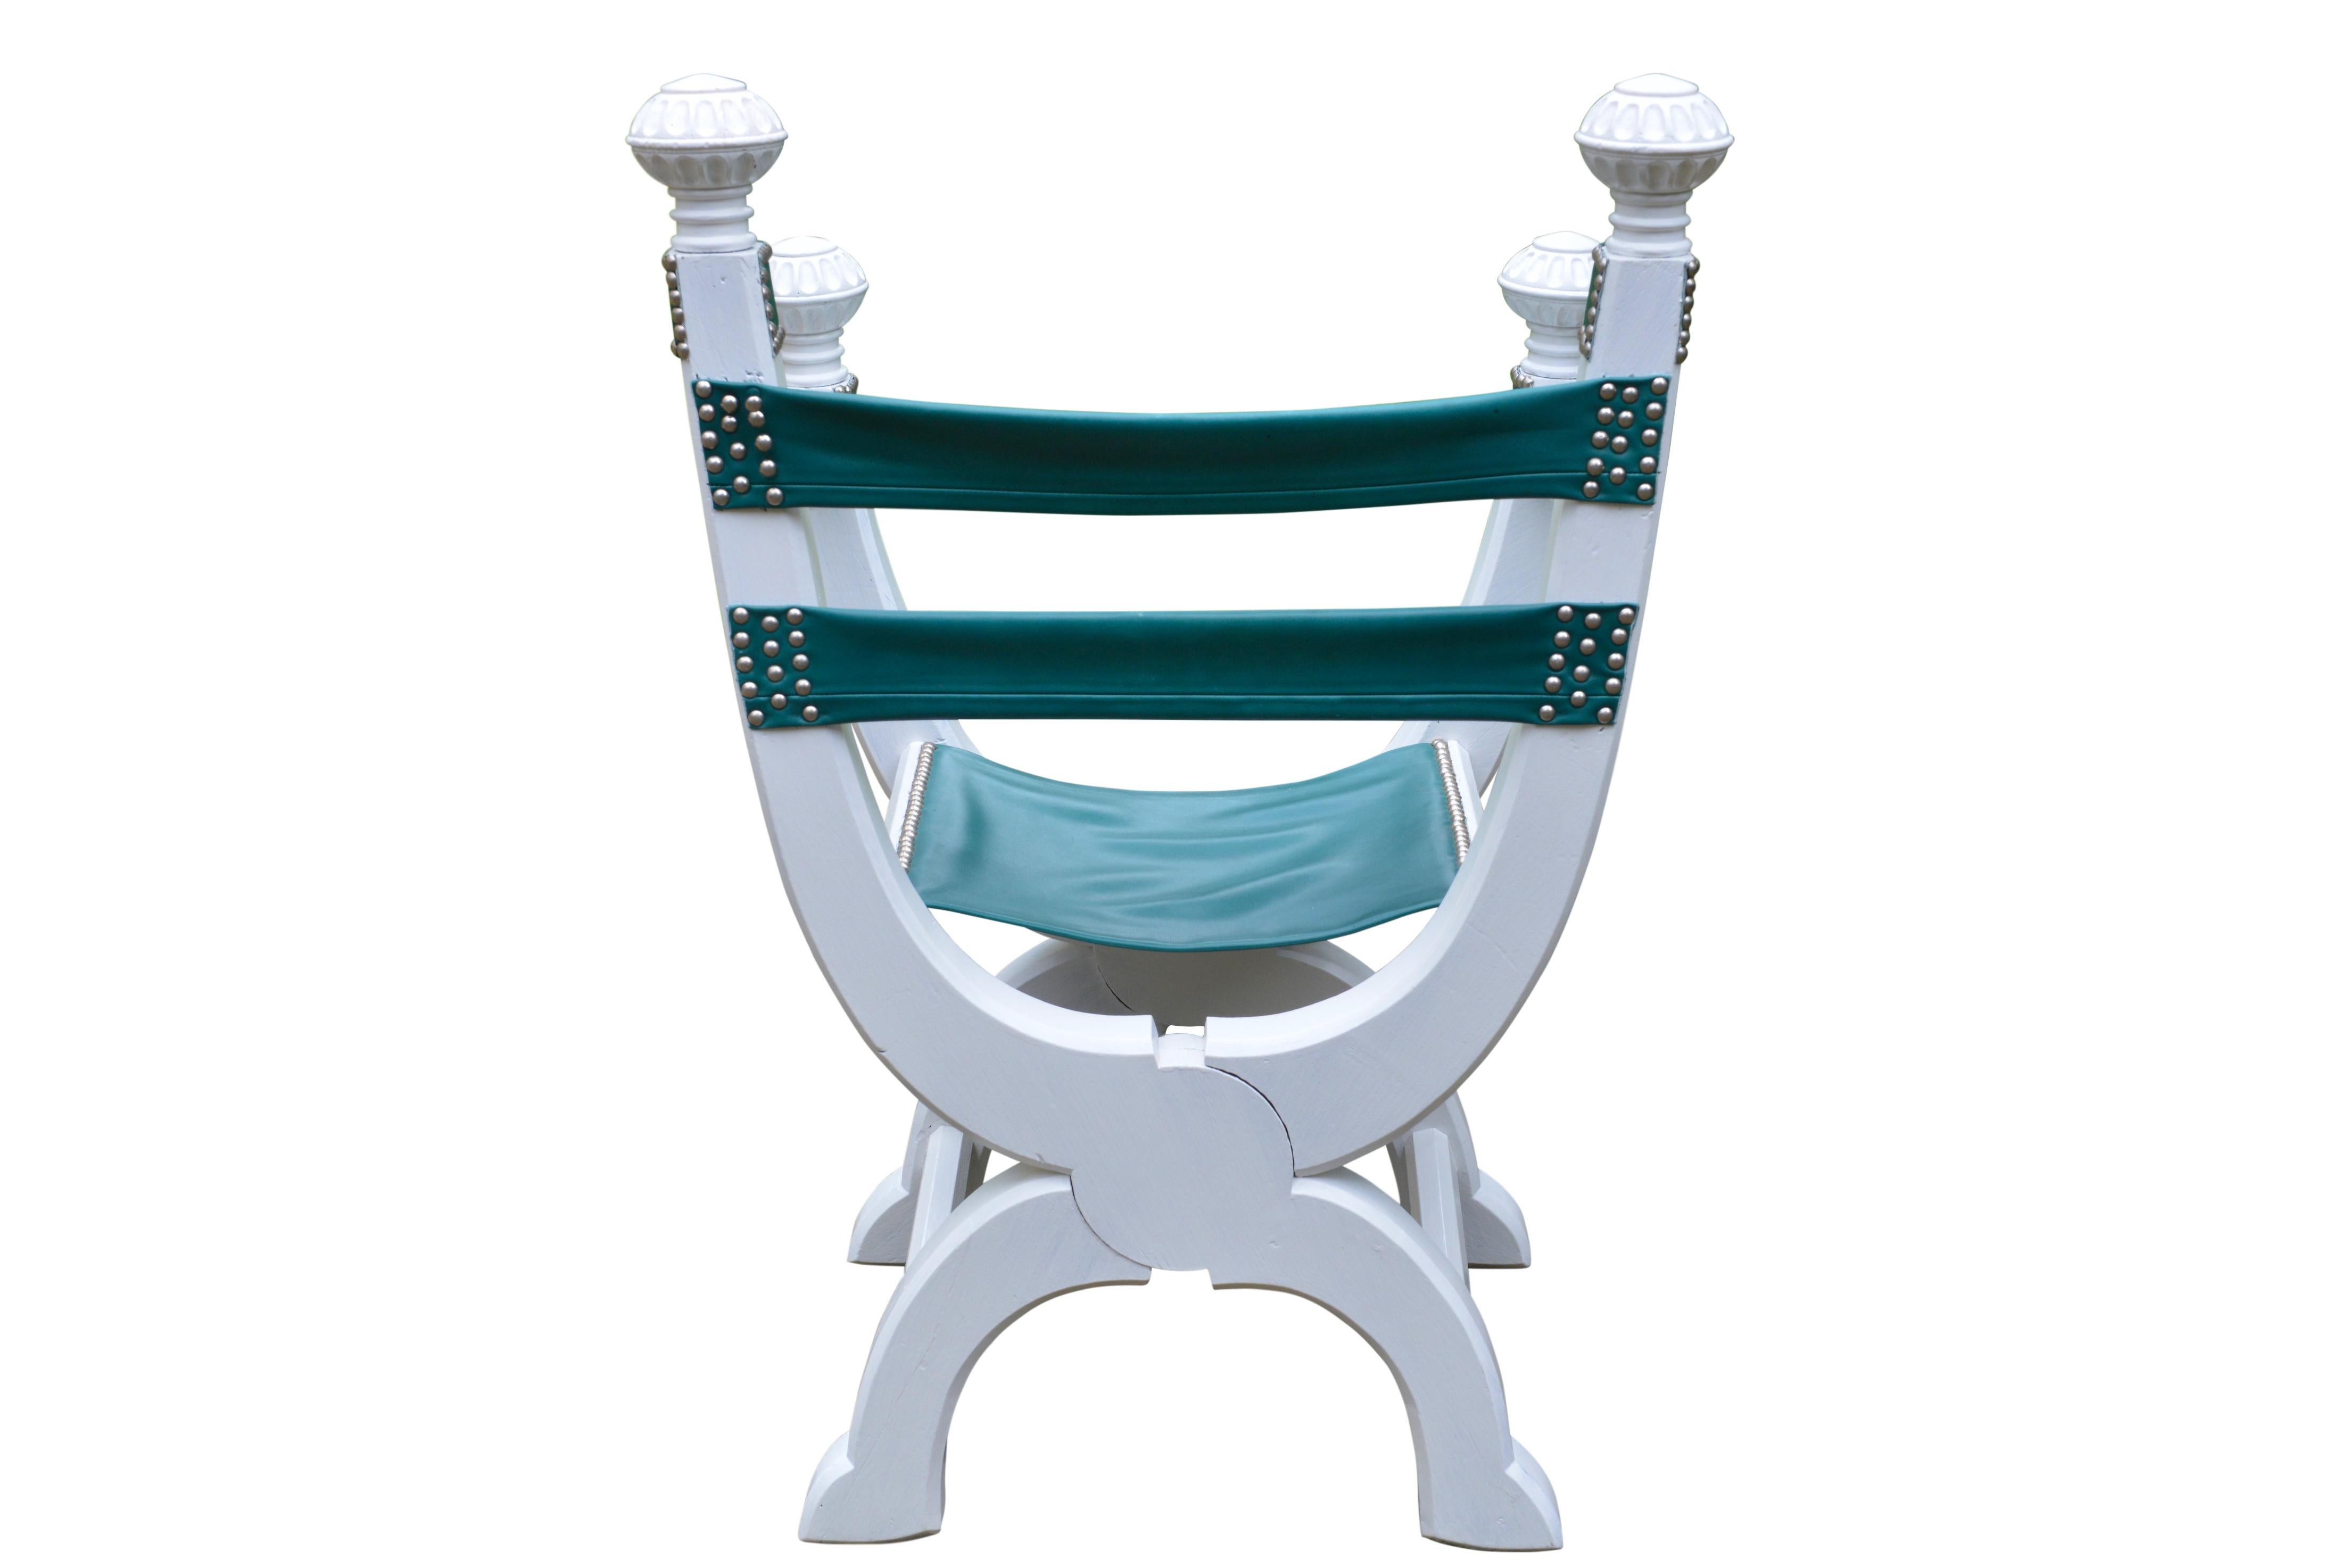 Funky white painted oak Dagobert type chair with aqua green colored leather seat and backrest. Finished with chrome studs. The Dagobert is an X shaped chair usually carved and upholstered in leather. Variations appeared in French, Italian, Spanish